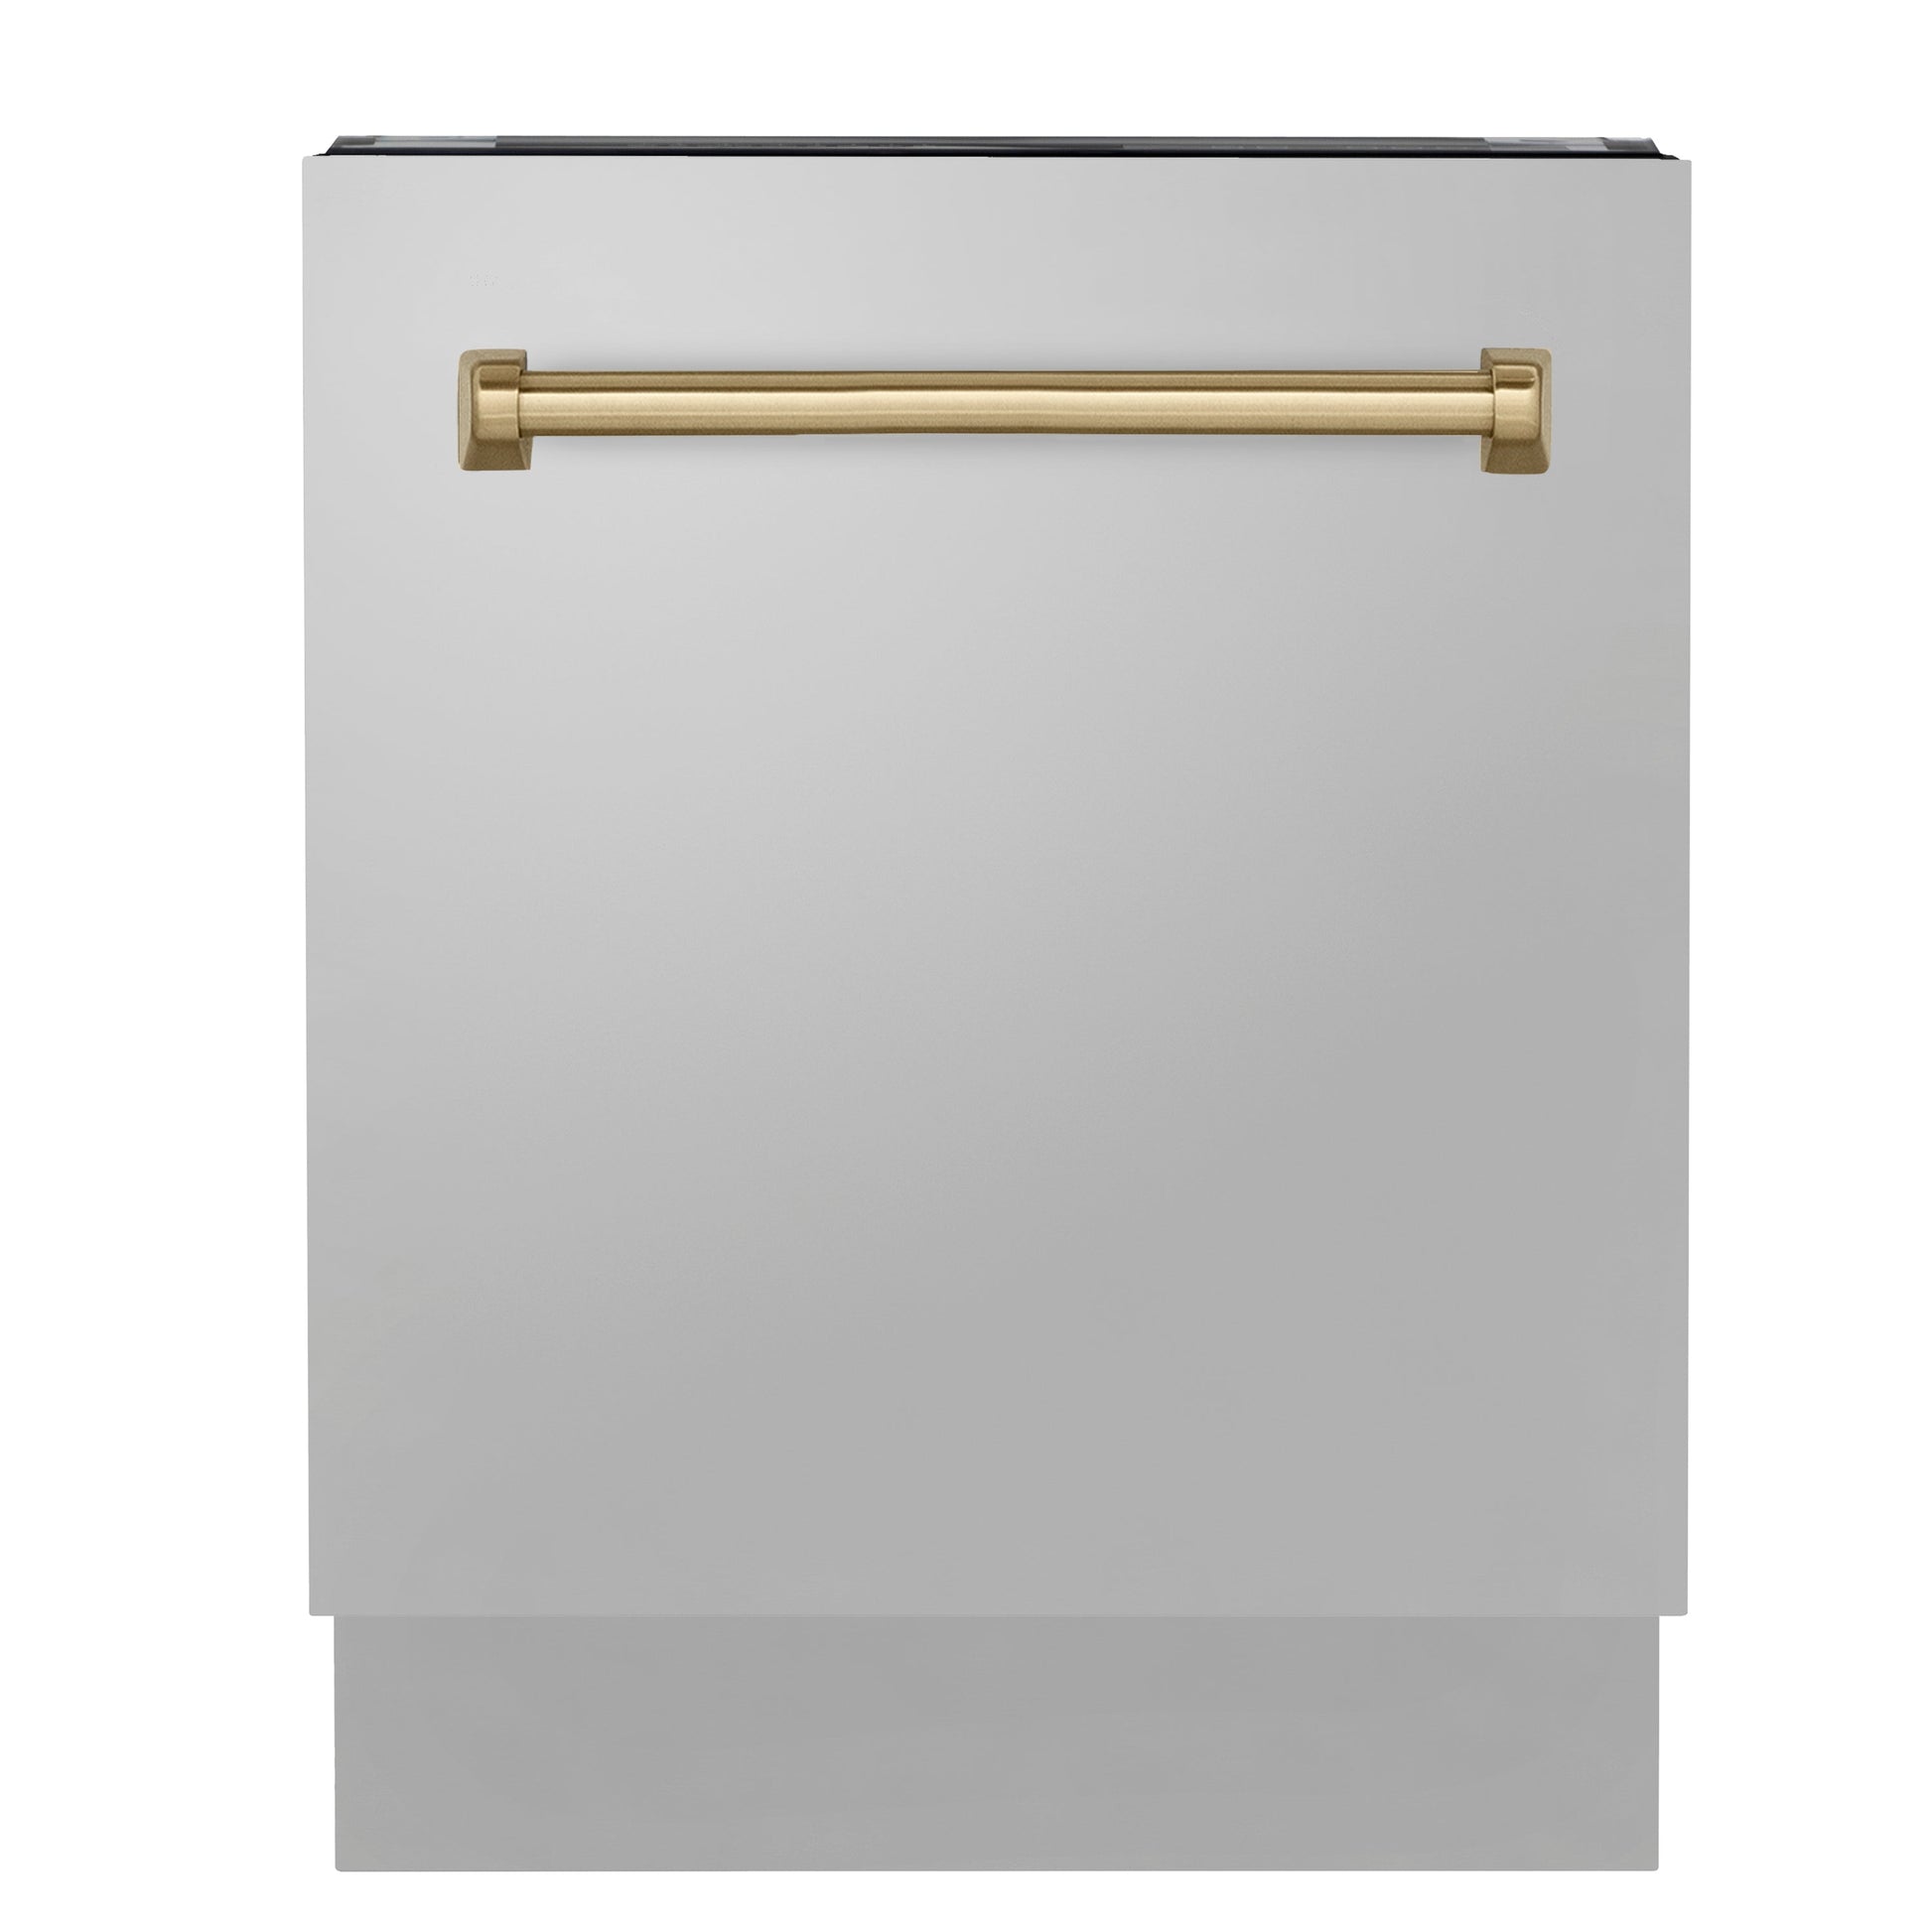 ZLINE Autograph Edition 24 in. 3rd Rack Top Control Tall Tub Dishwasher in Stainless Steel with Champagne Bronze Handle, 51dBa (DWVZ-304-24-CB) front, closed.